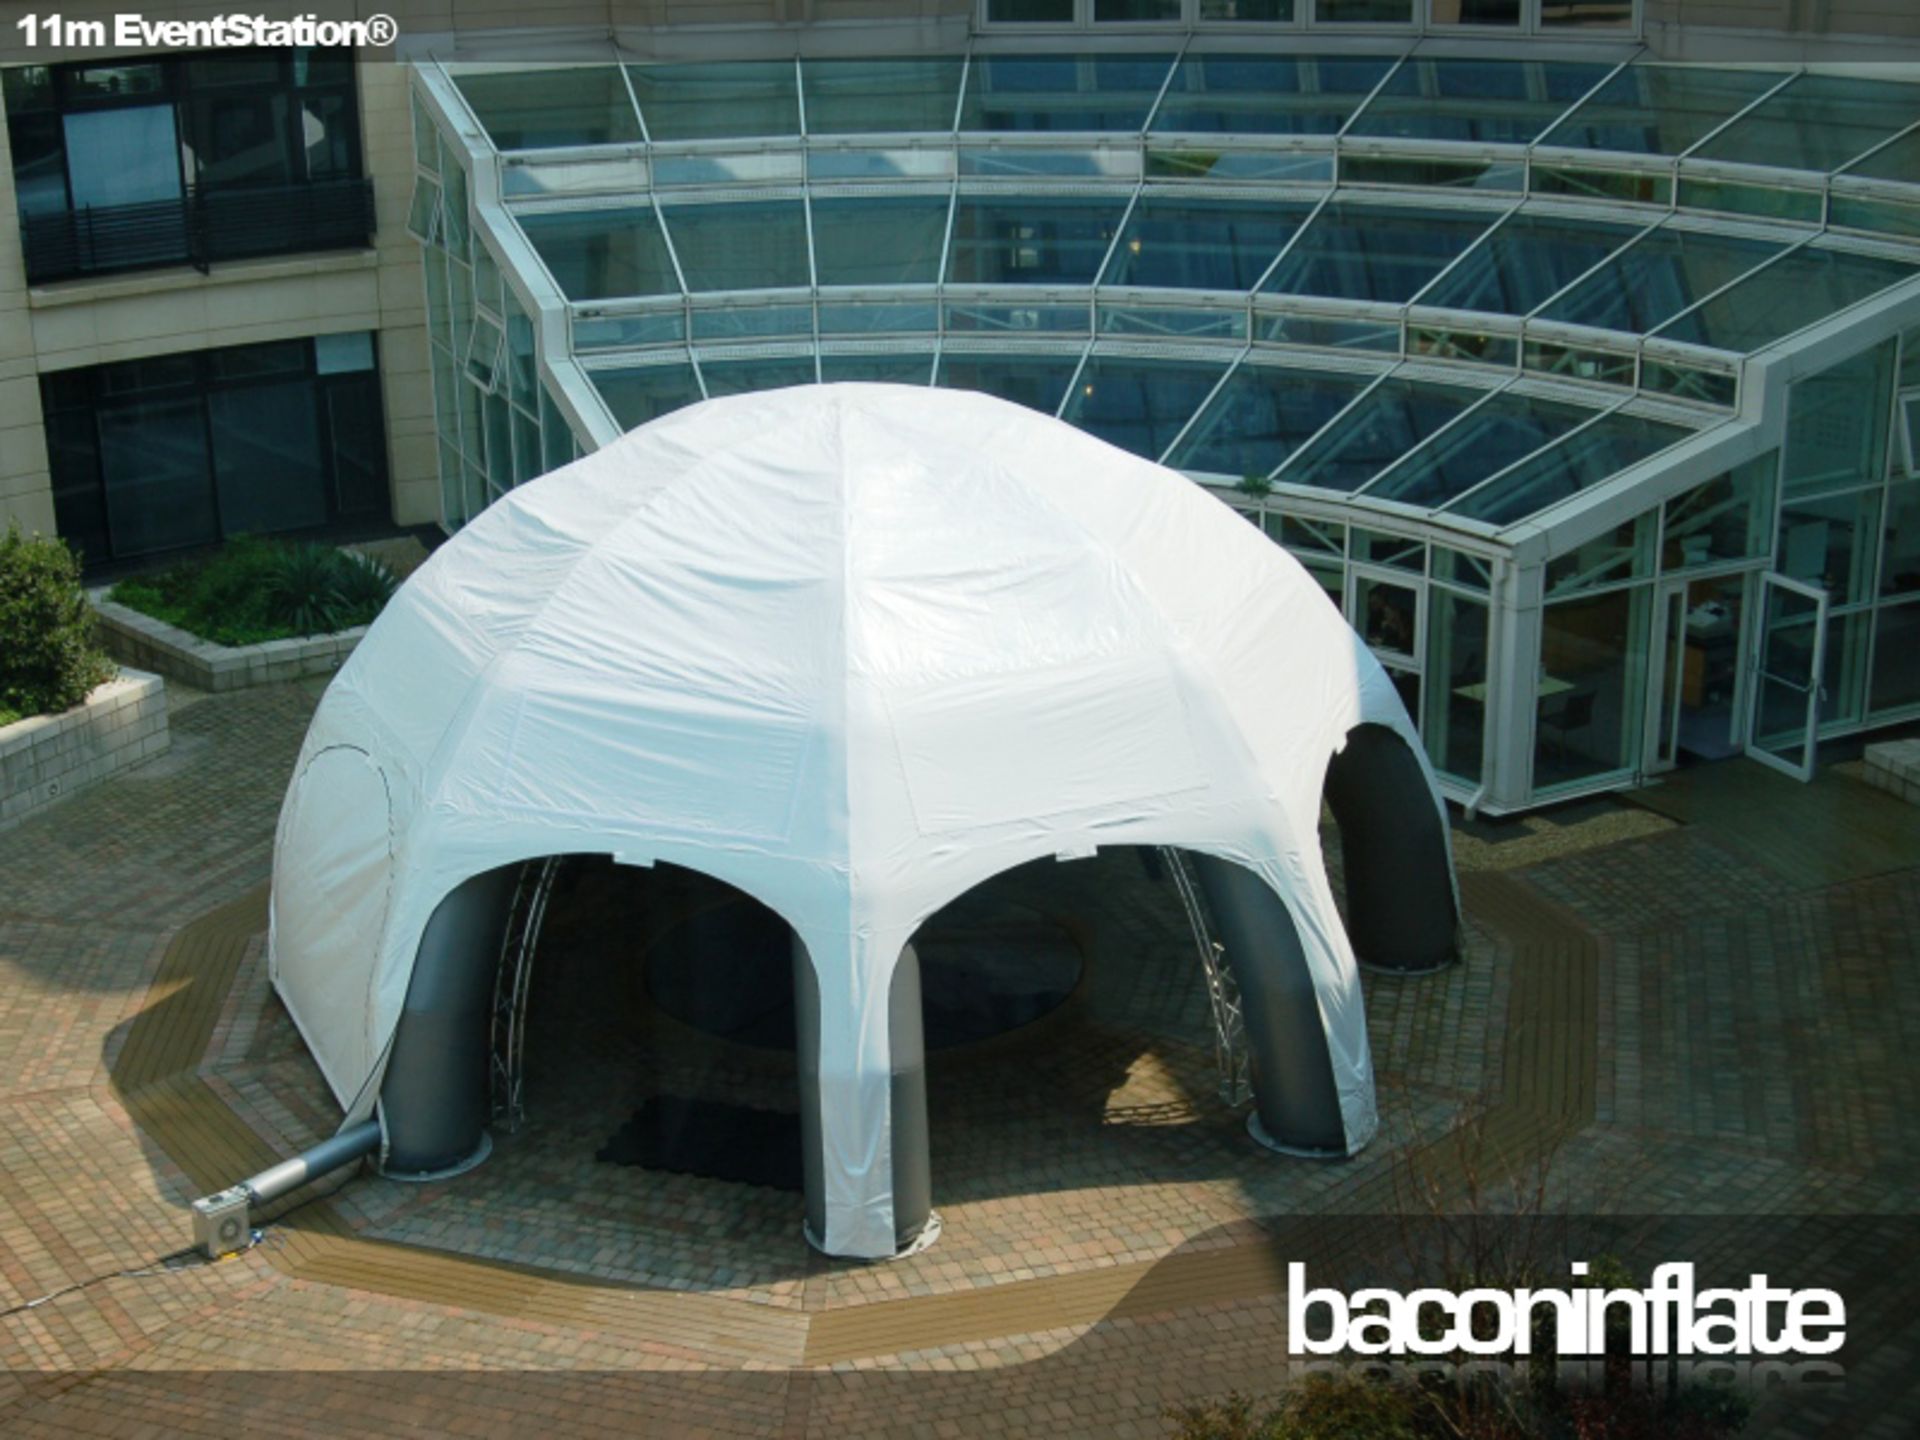 11m EventStation Leg Unit Inflatable Structure with Canopy (2 Bags) (Stock No’s; BiES & BiES 11/